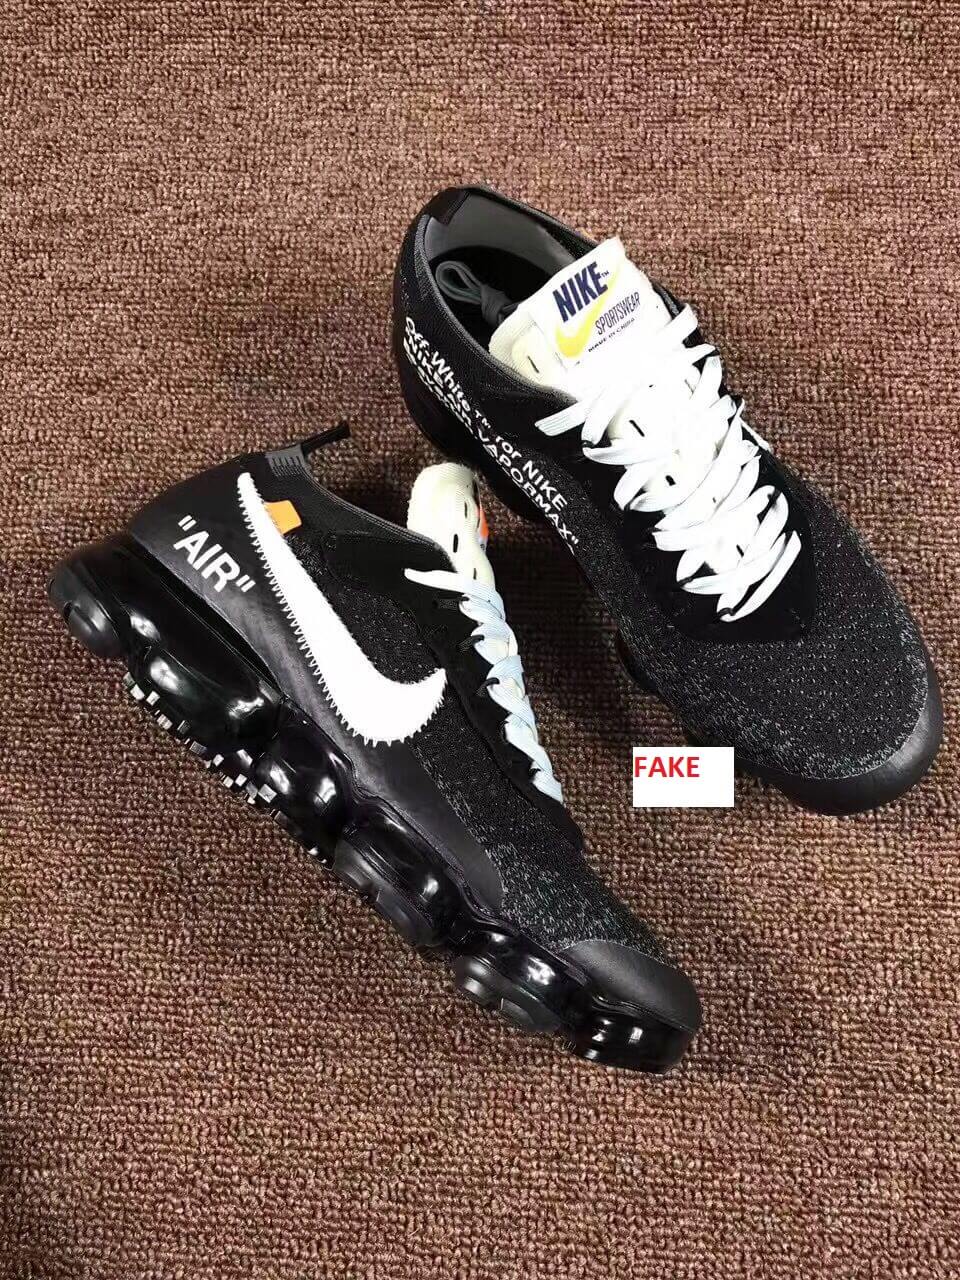 Scary Good Fake Off White Nike Air Vapormax Sneakers Are On The Market ...